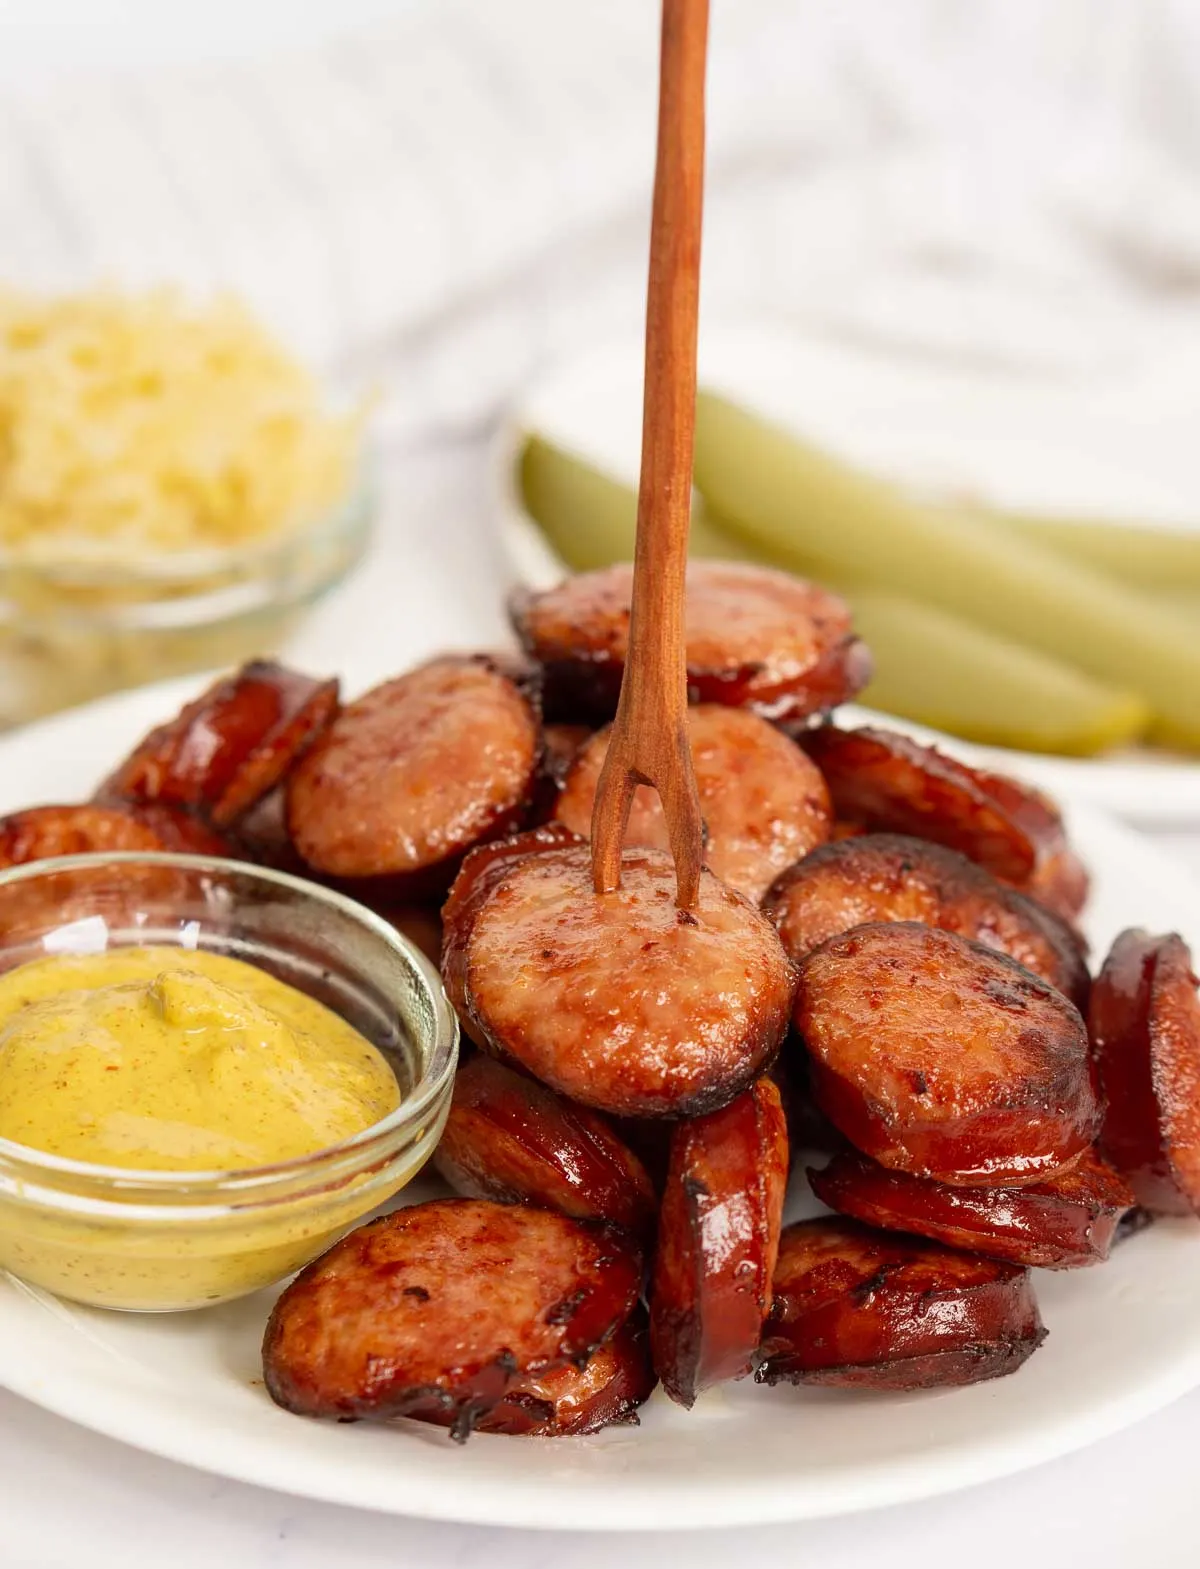 Kielbasa slices with a serving pick and mustard for dipping